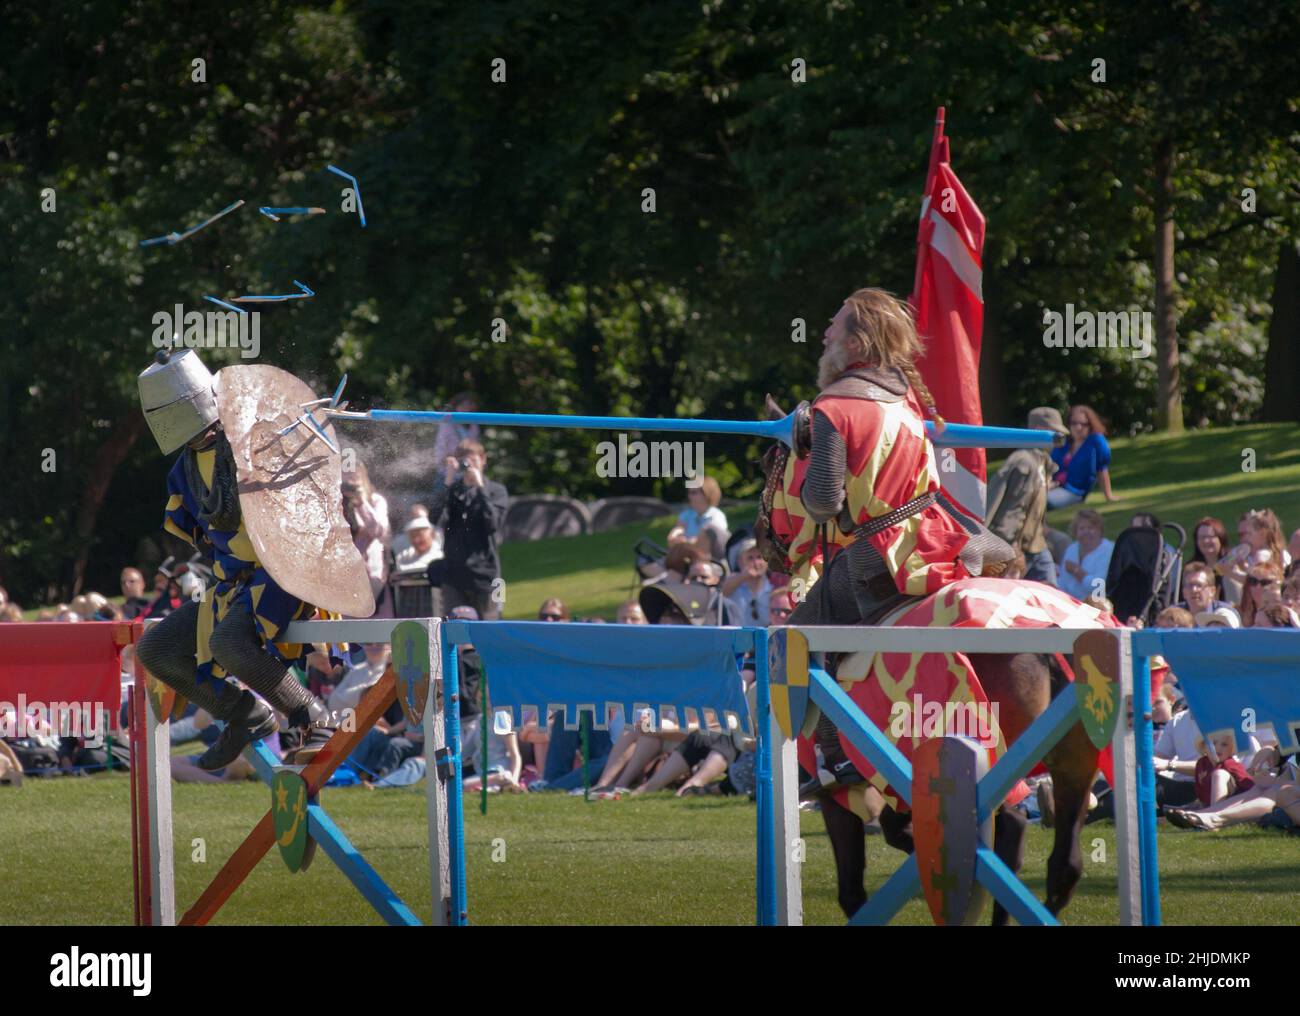 Two jousters colliding during a show, Linlithgow, Scotland, UK. Stock Photo